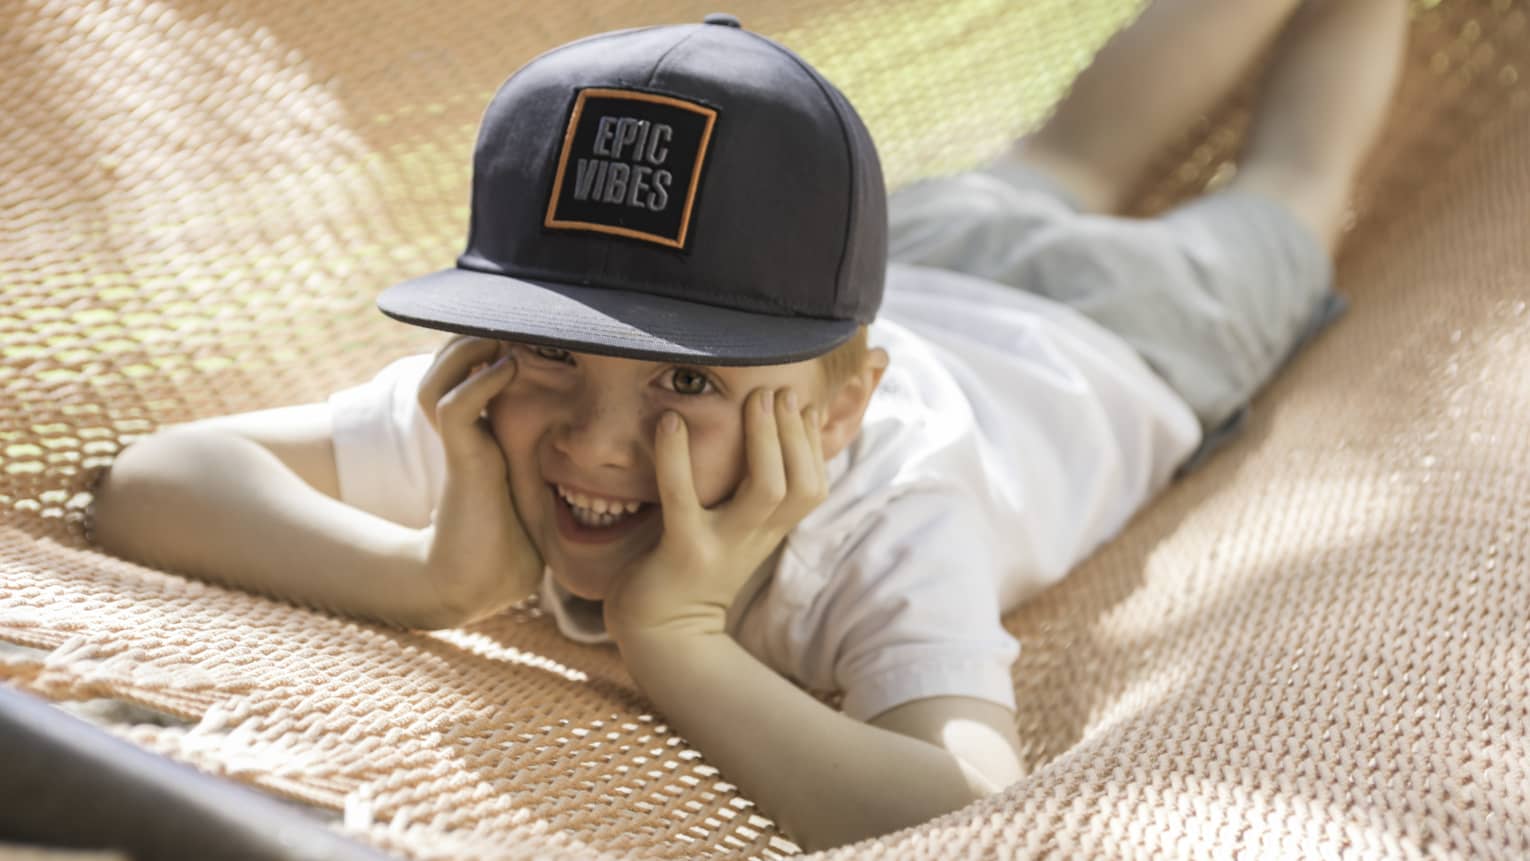 Child laying on hammock on stomach, face in hands and wearing a black cap